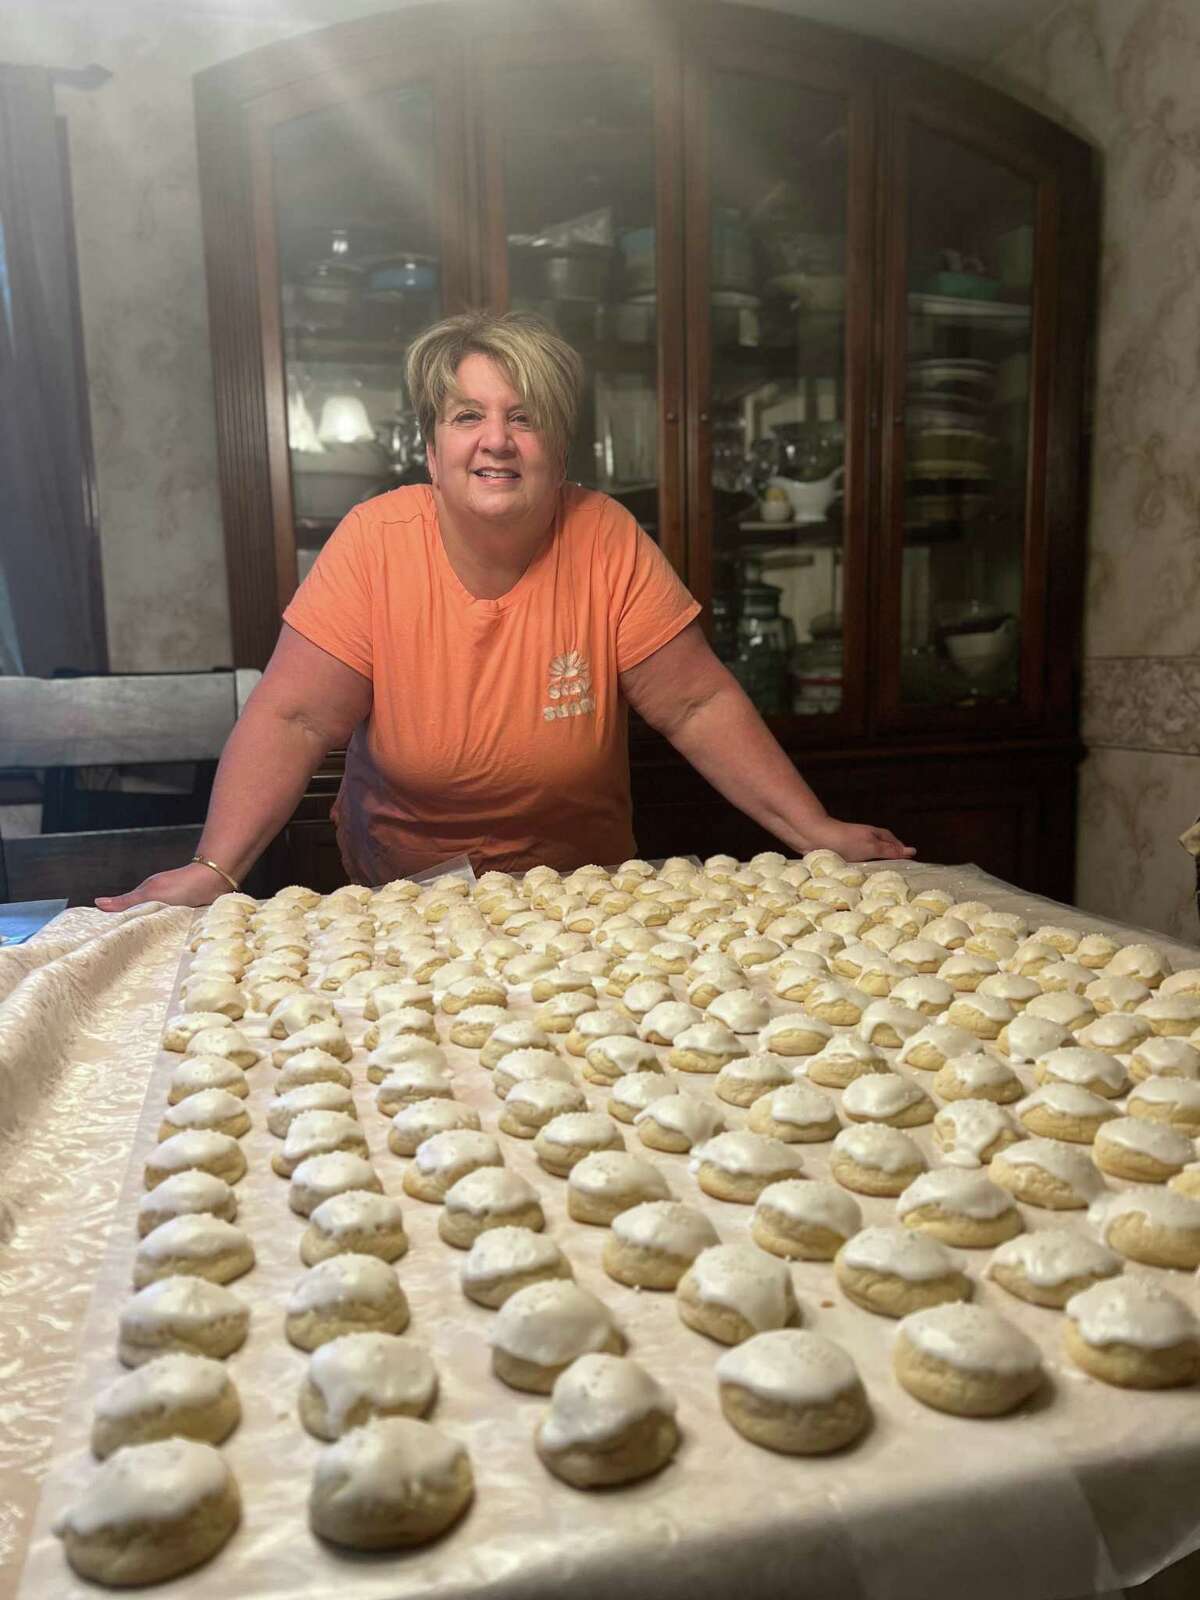 Lisa Vuillemot of Burlington bakes her “famous” anisette cookies. She joined a group called the Wedding Community Cookie Table group on Facebook, which this week sent 1,000 dozen cookies and gifts to the community of Uvalde, Texas.